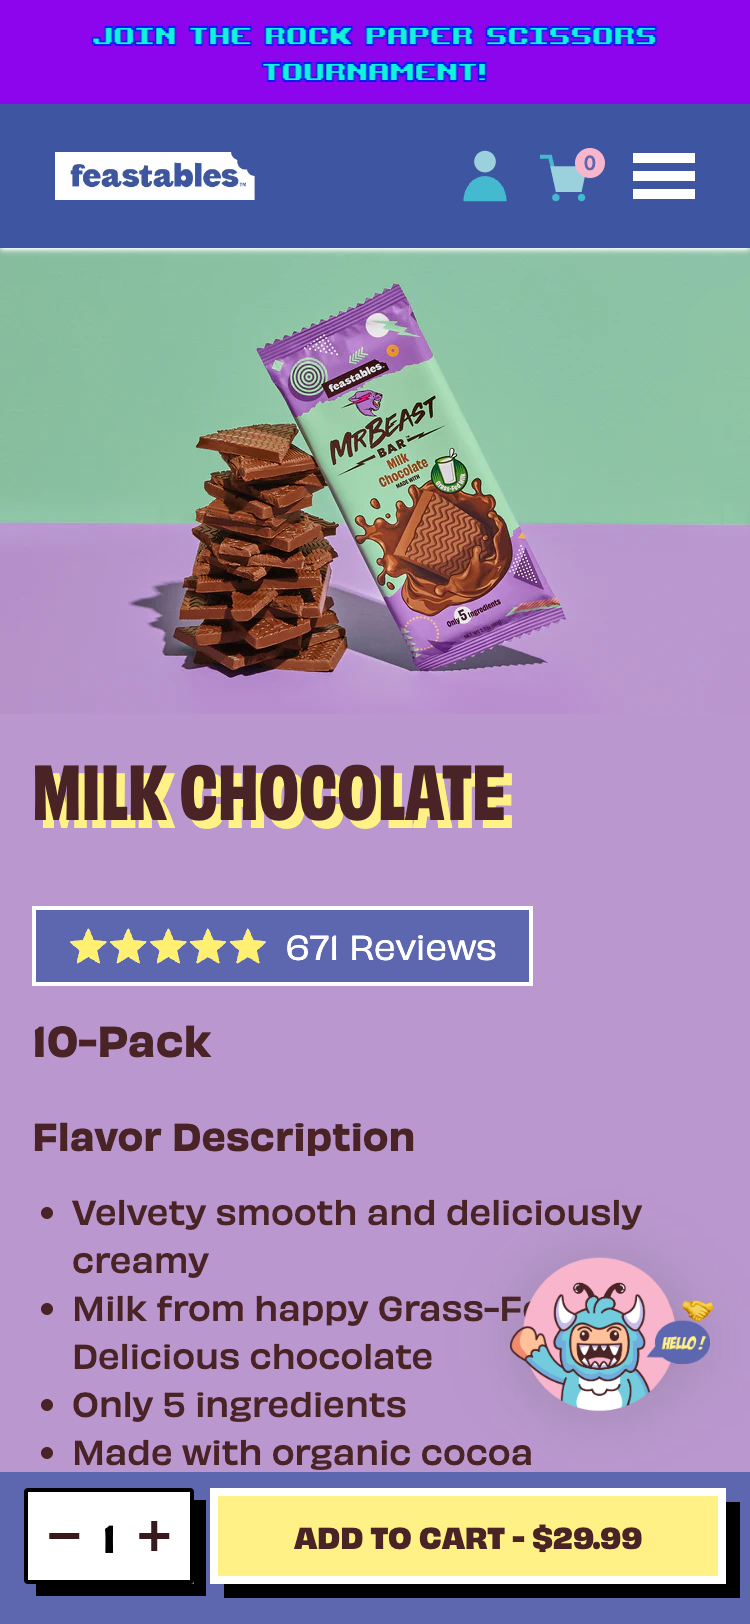 Mobile screenshot of the 'Milk Chocolate' product page of the Feastables website. There is a photograph of the Mr Beast Milk Chocolate Bar, and below it is a product description and an 'Add to cart' button.